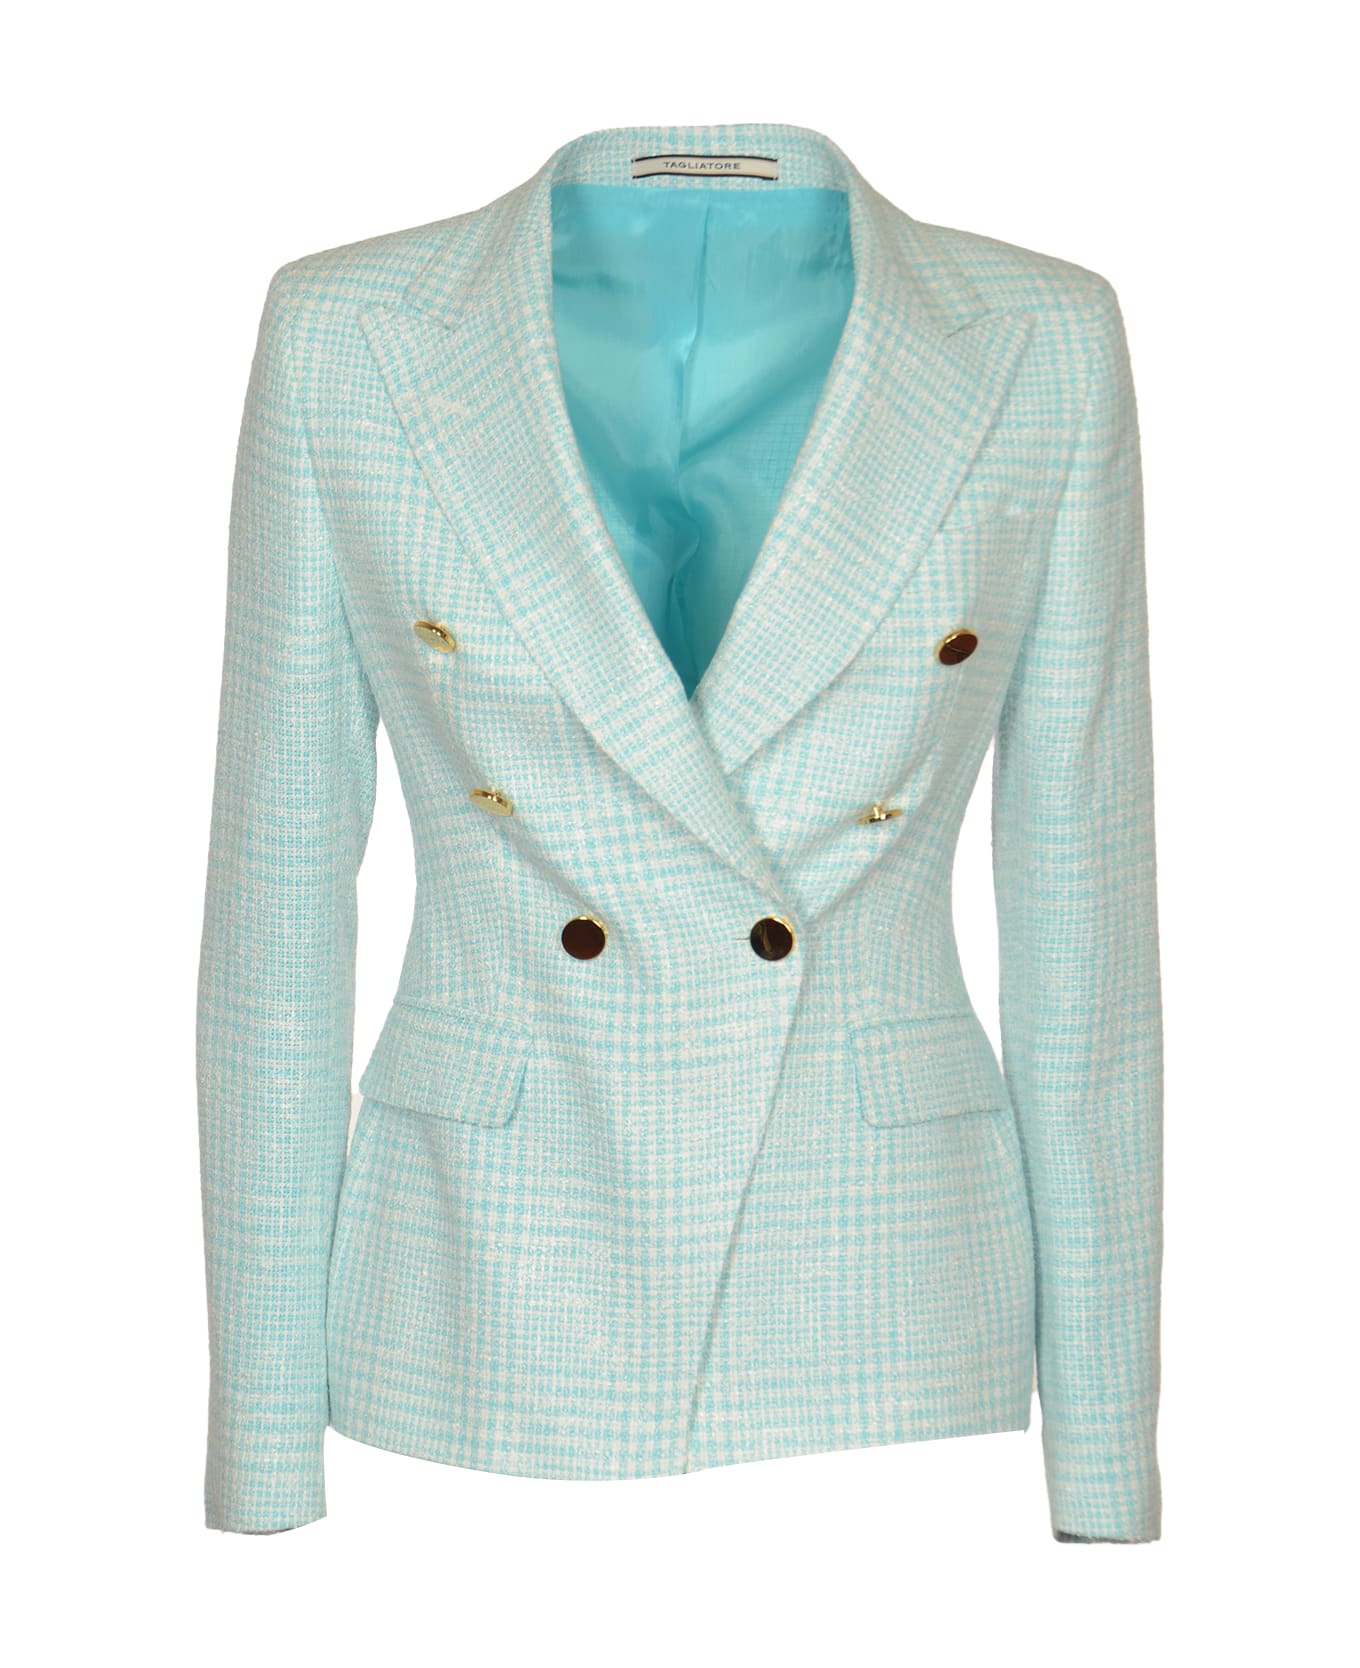 Tagliatore Double-breasted Fitted Blazer - Light Blue